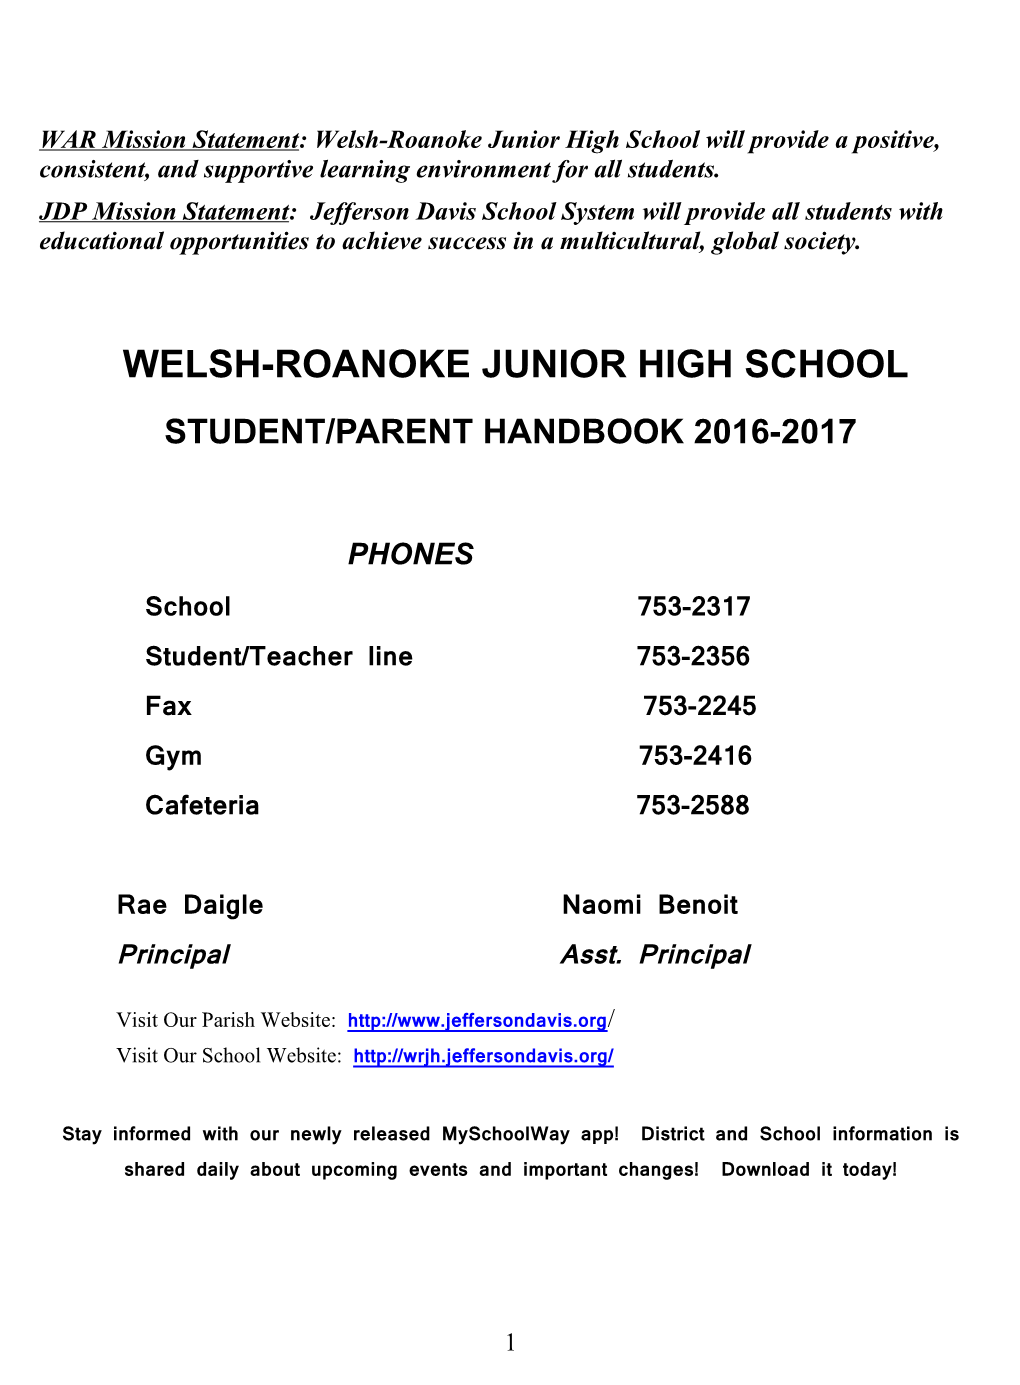 WAR Mission Statement: Welsh-Roanoke Junior High School Will Provide a Positive, Consistent